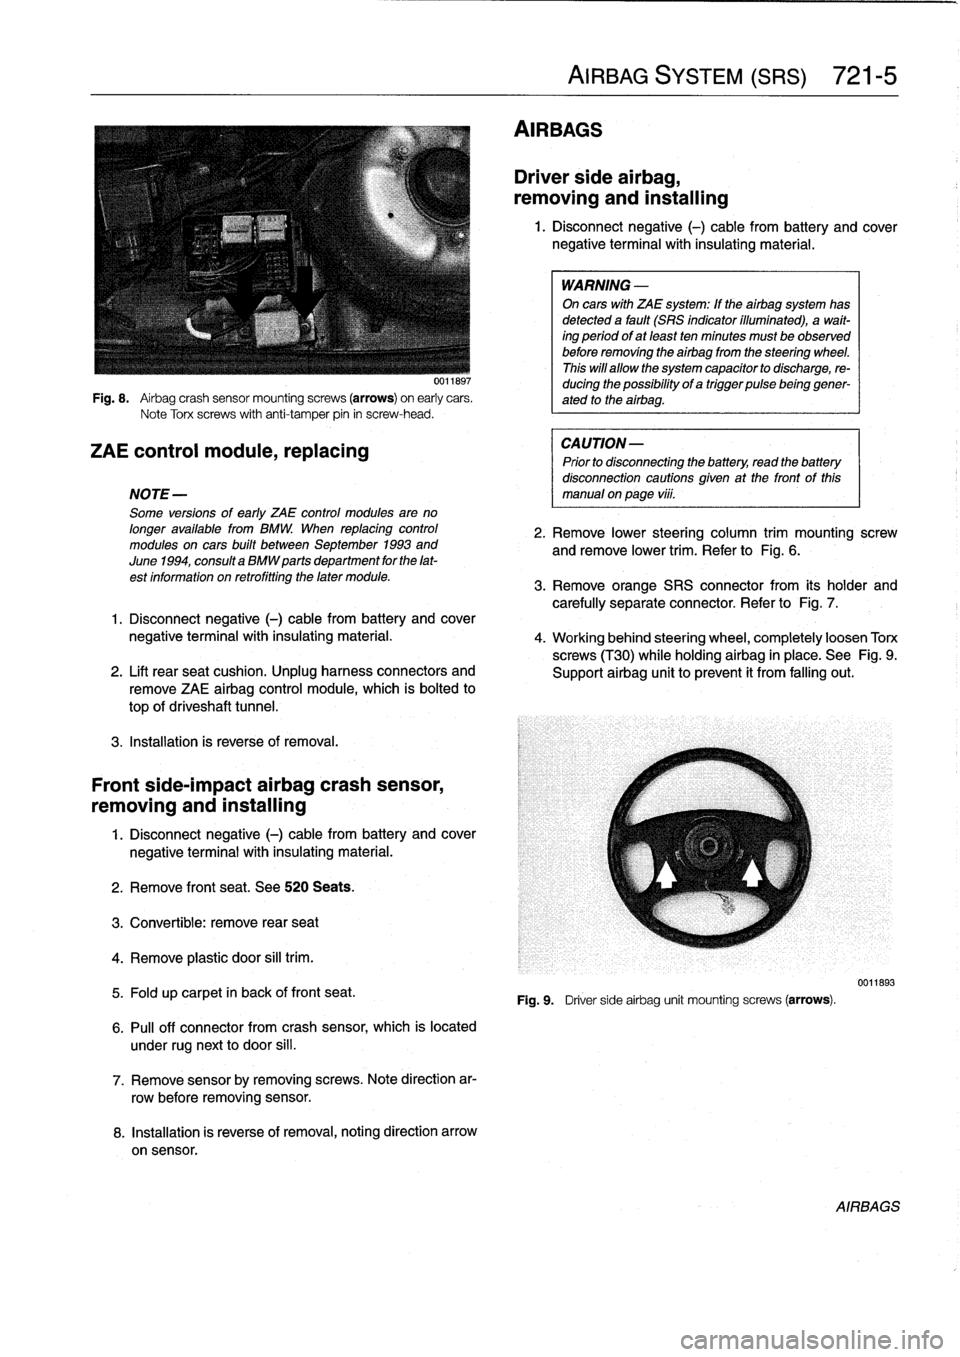 BMW 328i 1995 E36 Owners Manual 
Fig
.
8
.

	

Airbag
crash
sensor
mountingscrews
(arrows)
on
early
cars
.
Note
Torx
screws
with
anti-tamper
pin
in
screw-head
.

ZAE
control
module,
replacing

NOTE-

Some
versions
of
early
ZAE
contr